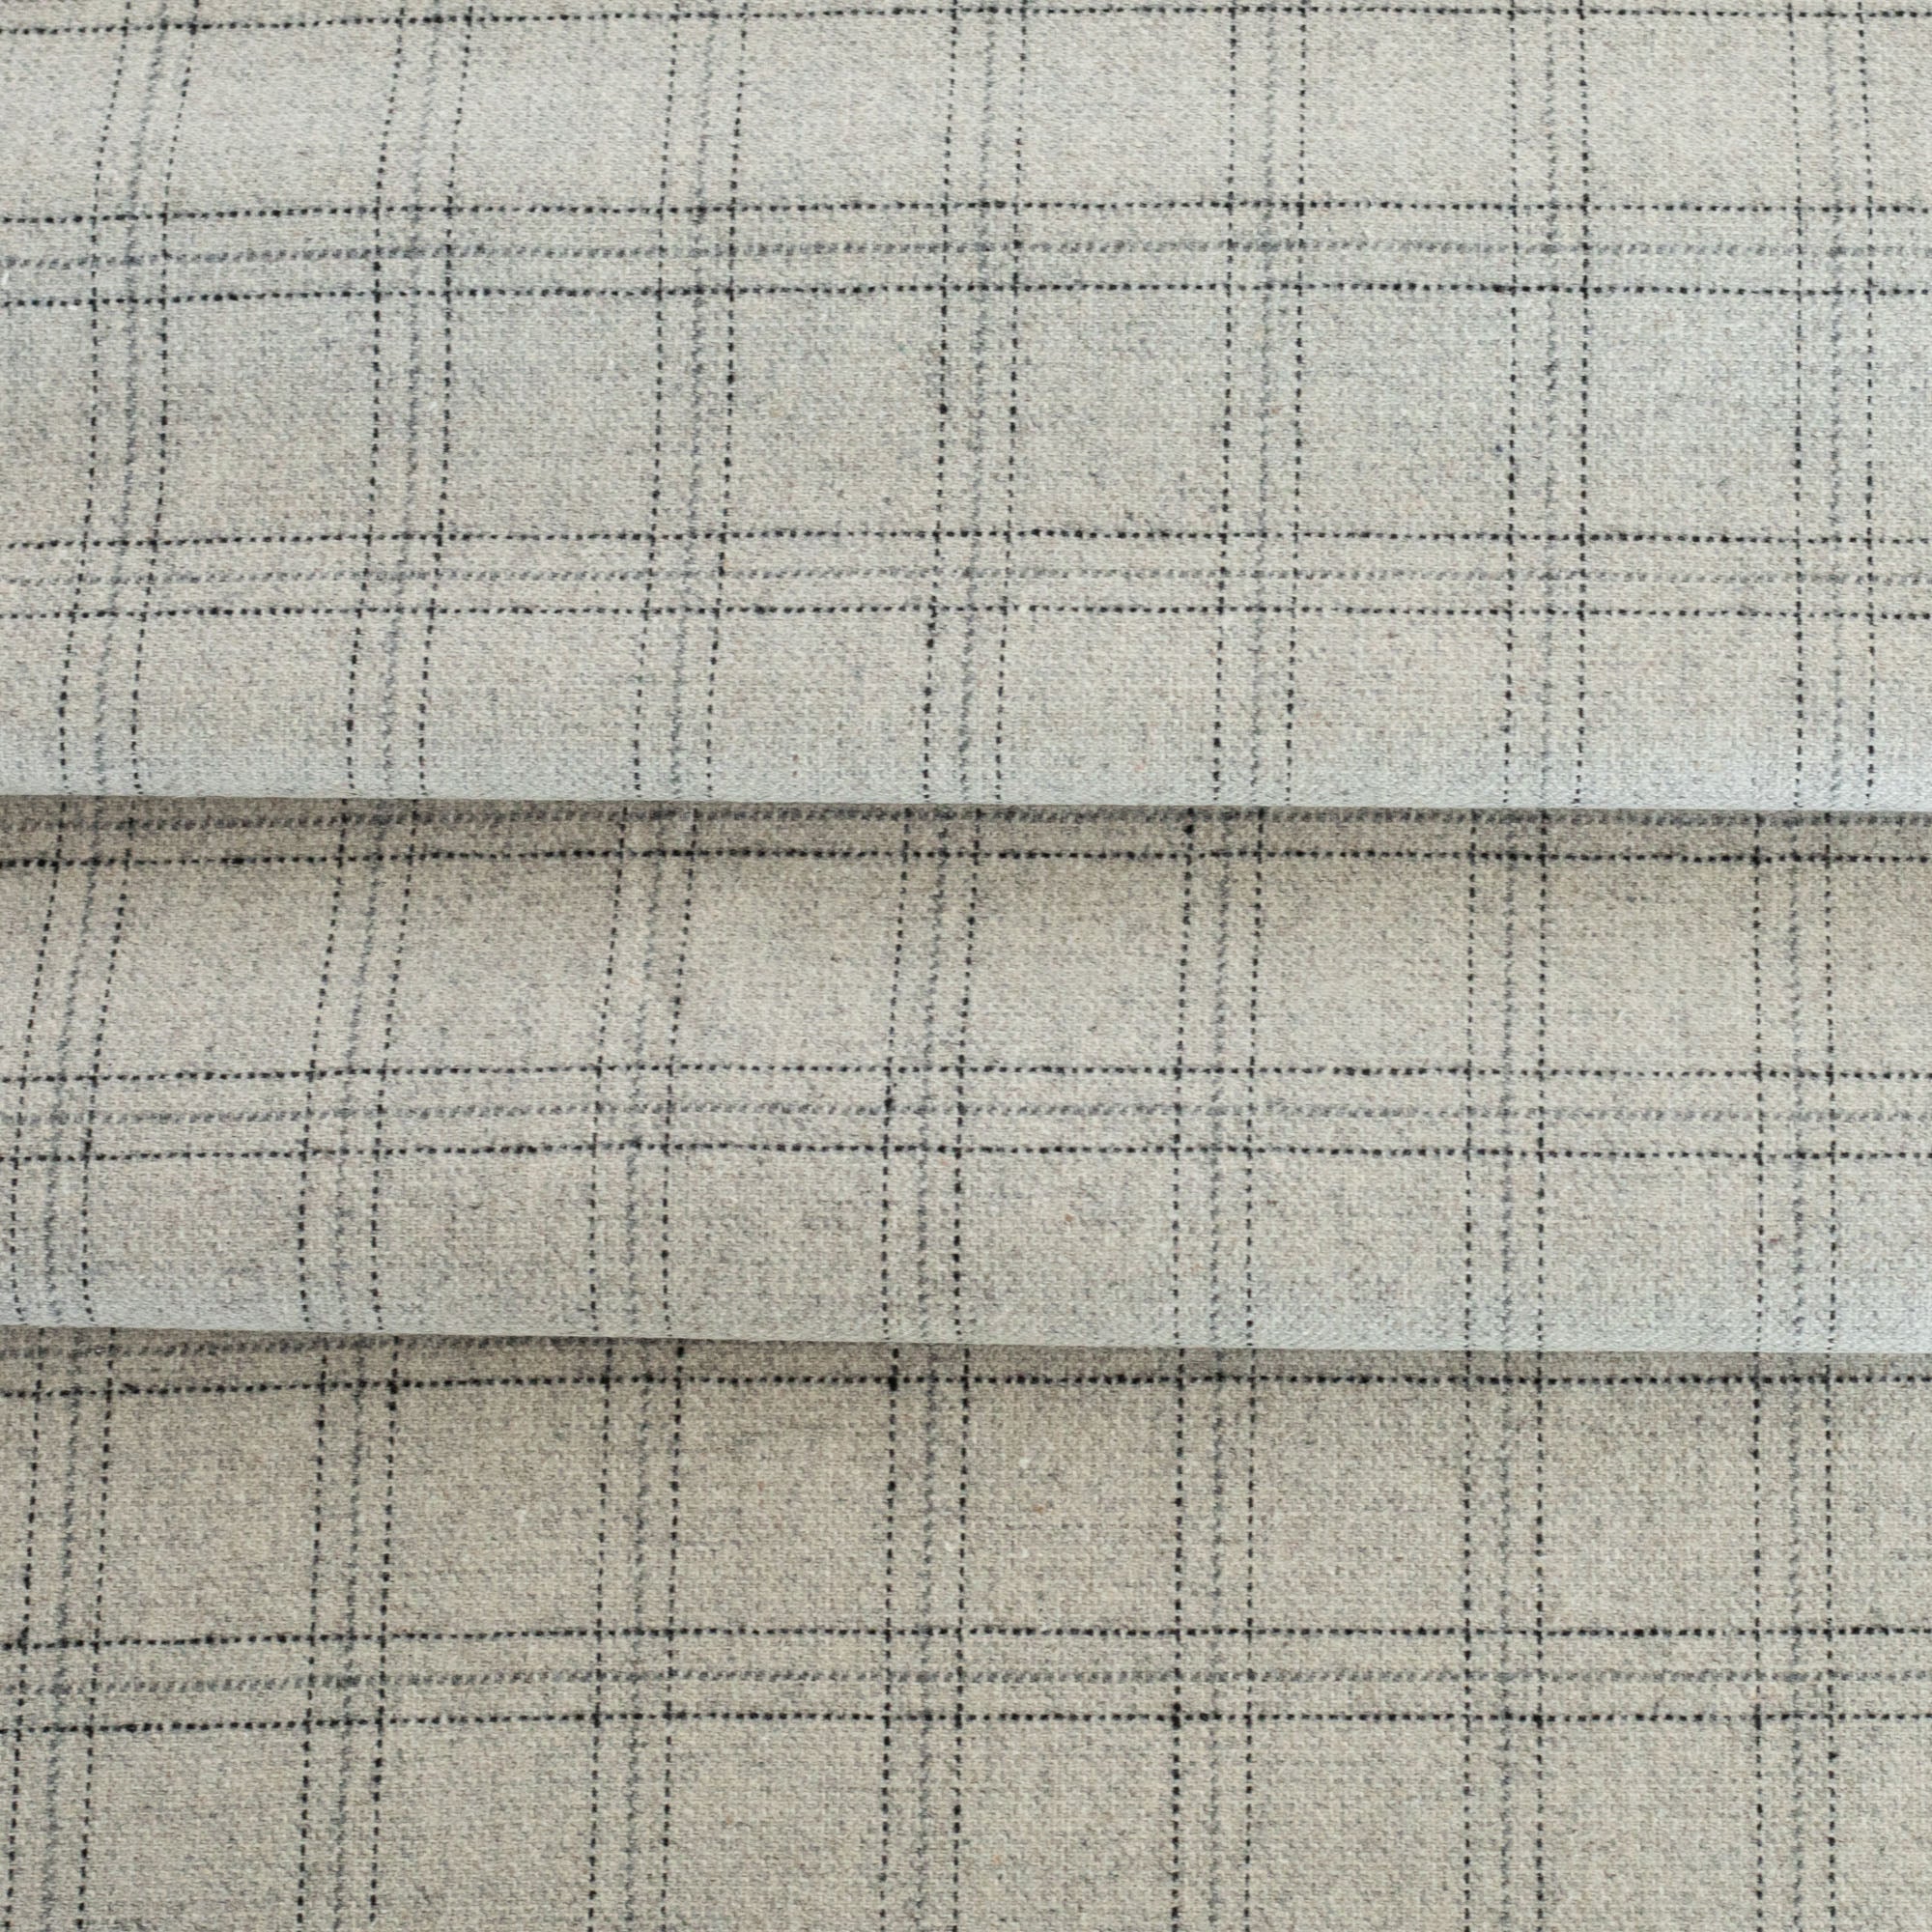 Dorset Plaid : a fog gray with fine blue and charcoal lines home decor fabric